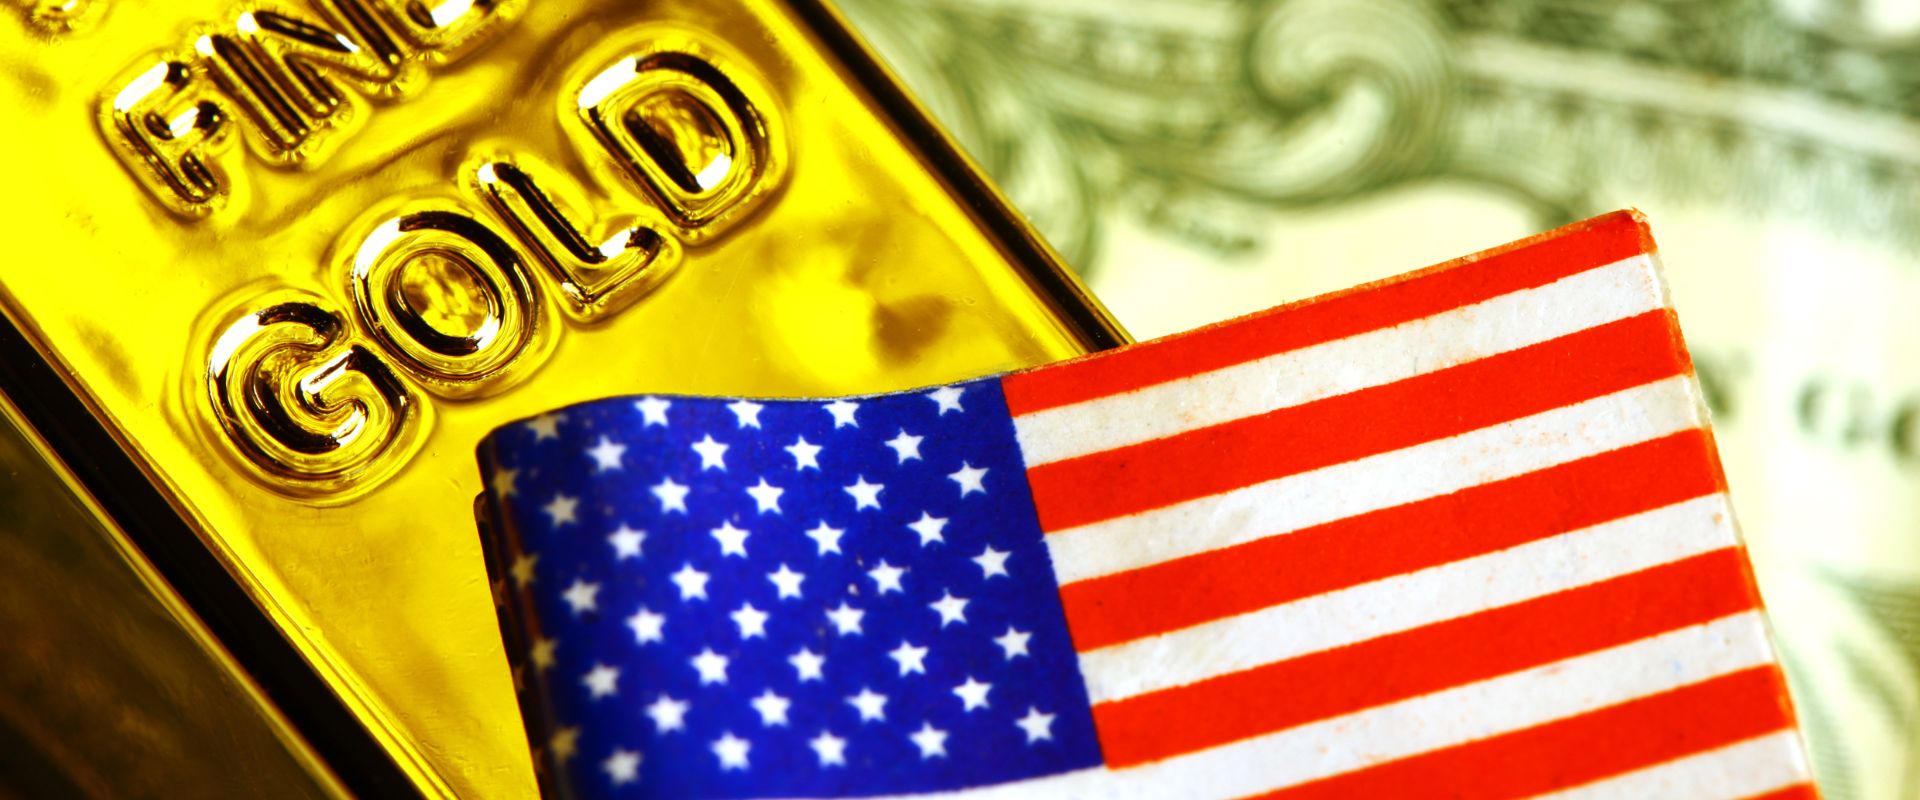 united states flag and gold bar on dollar banknote background